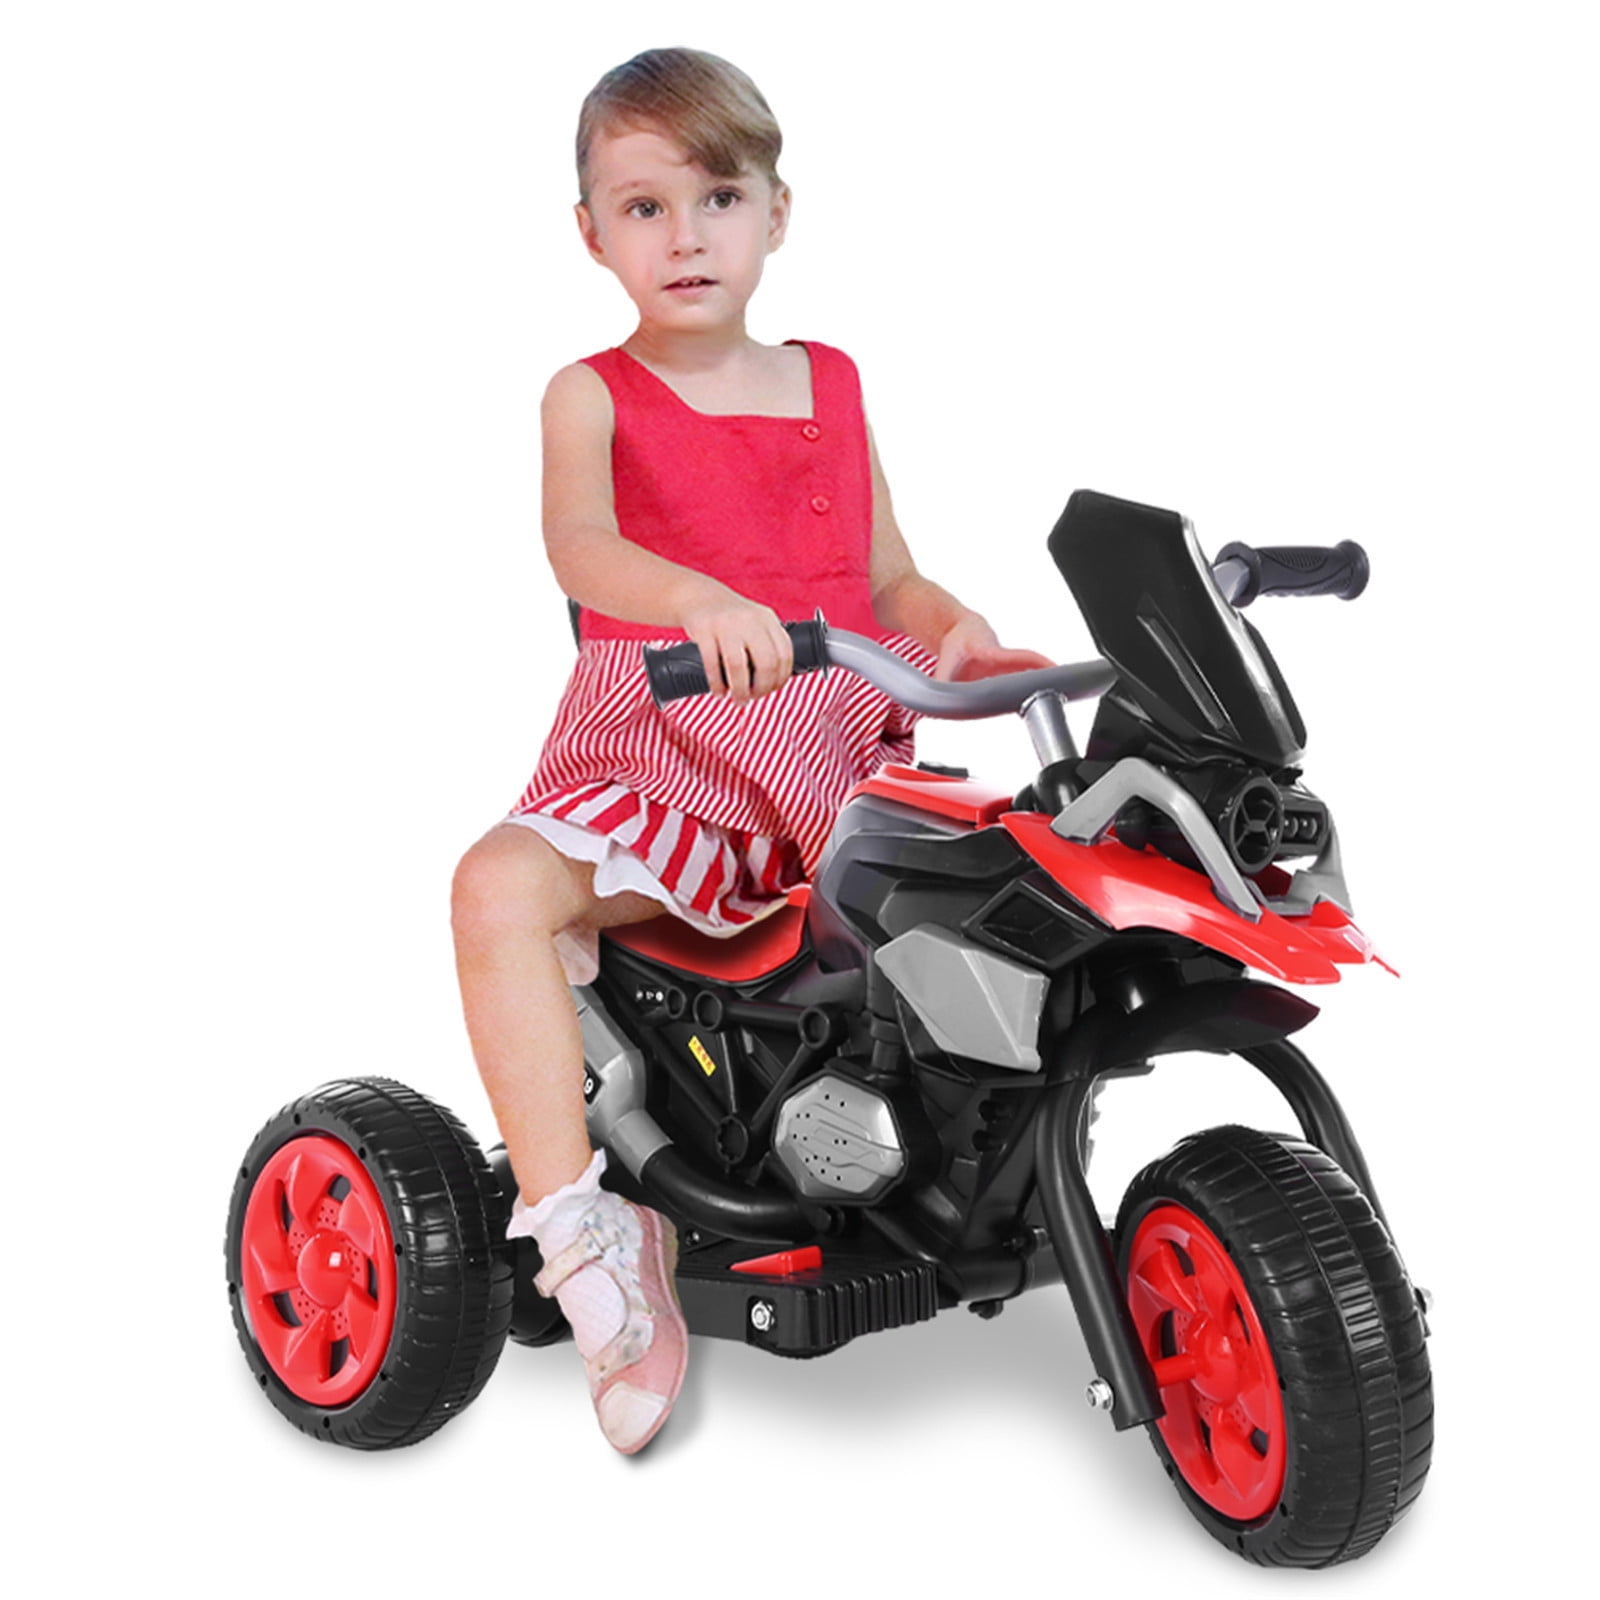 Details about   Children Electric Car Ride-On Three Wheel Beach Motorcycle Kid Toy Gift Lights 